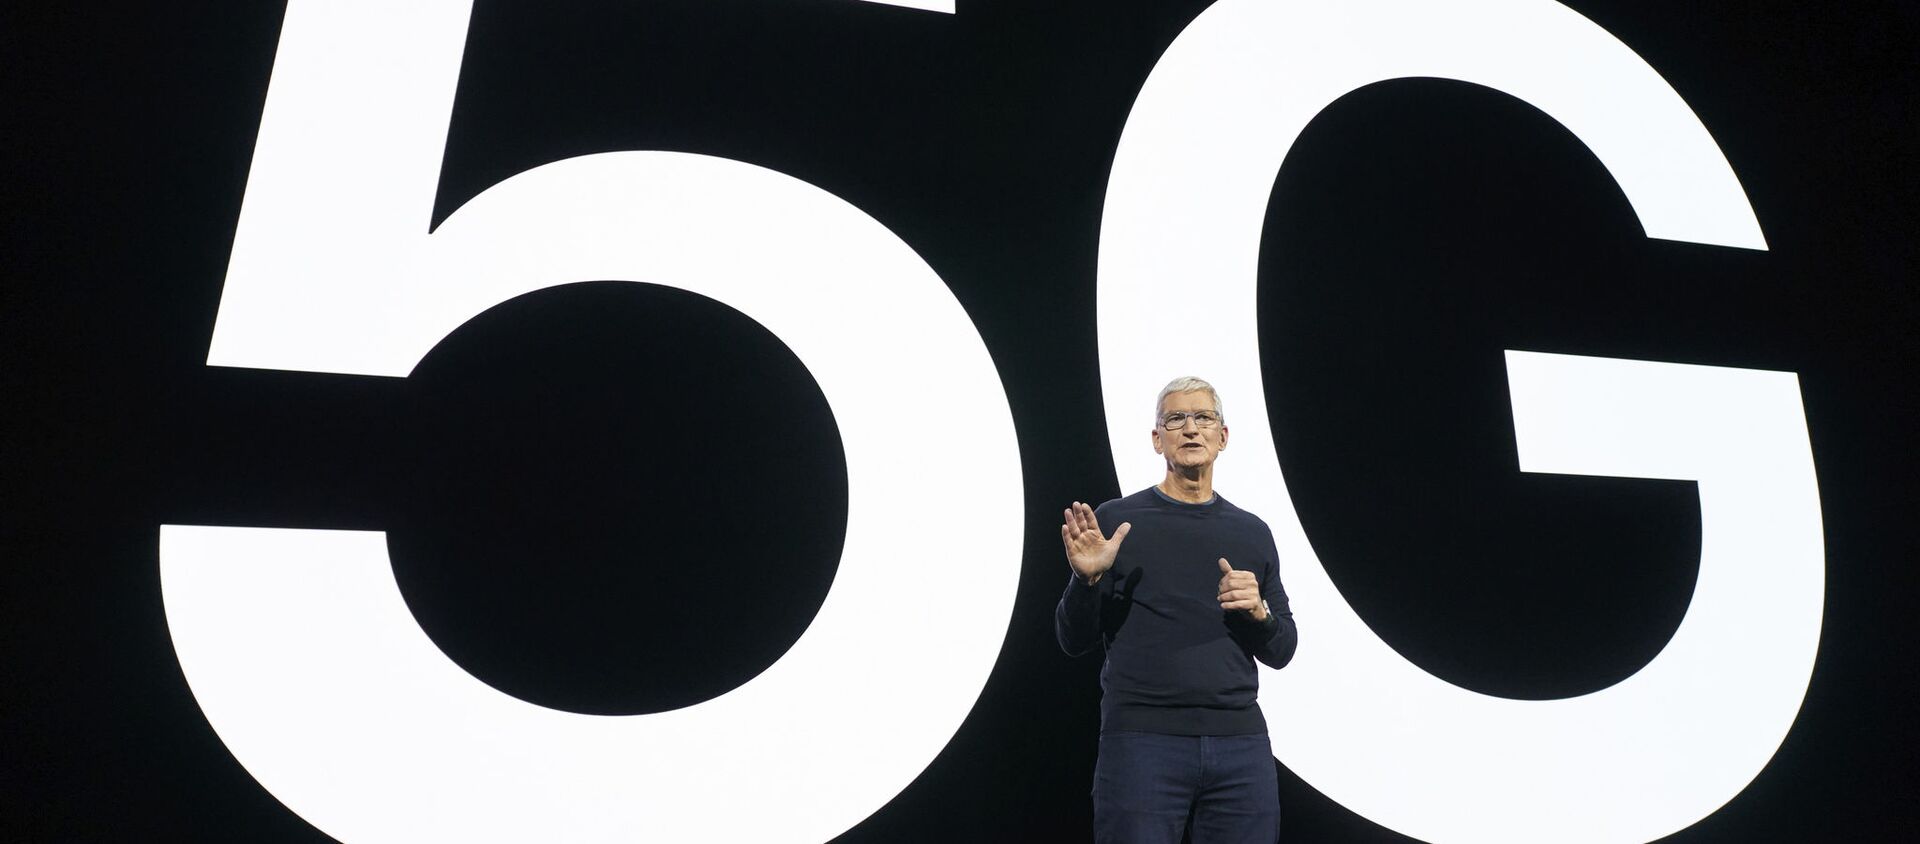 In this photo released by Apple, Tim Cook, chief executive of the software giant, speaks about 5G during an Apple event at Apple Park in Cupertino, California on 13 October 2020. - Sputnik International, 1920, 13.10.2020